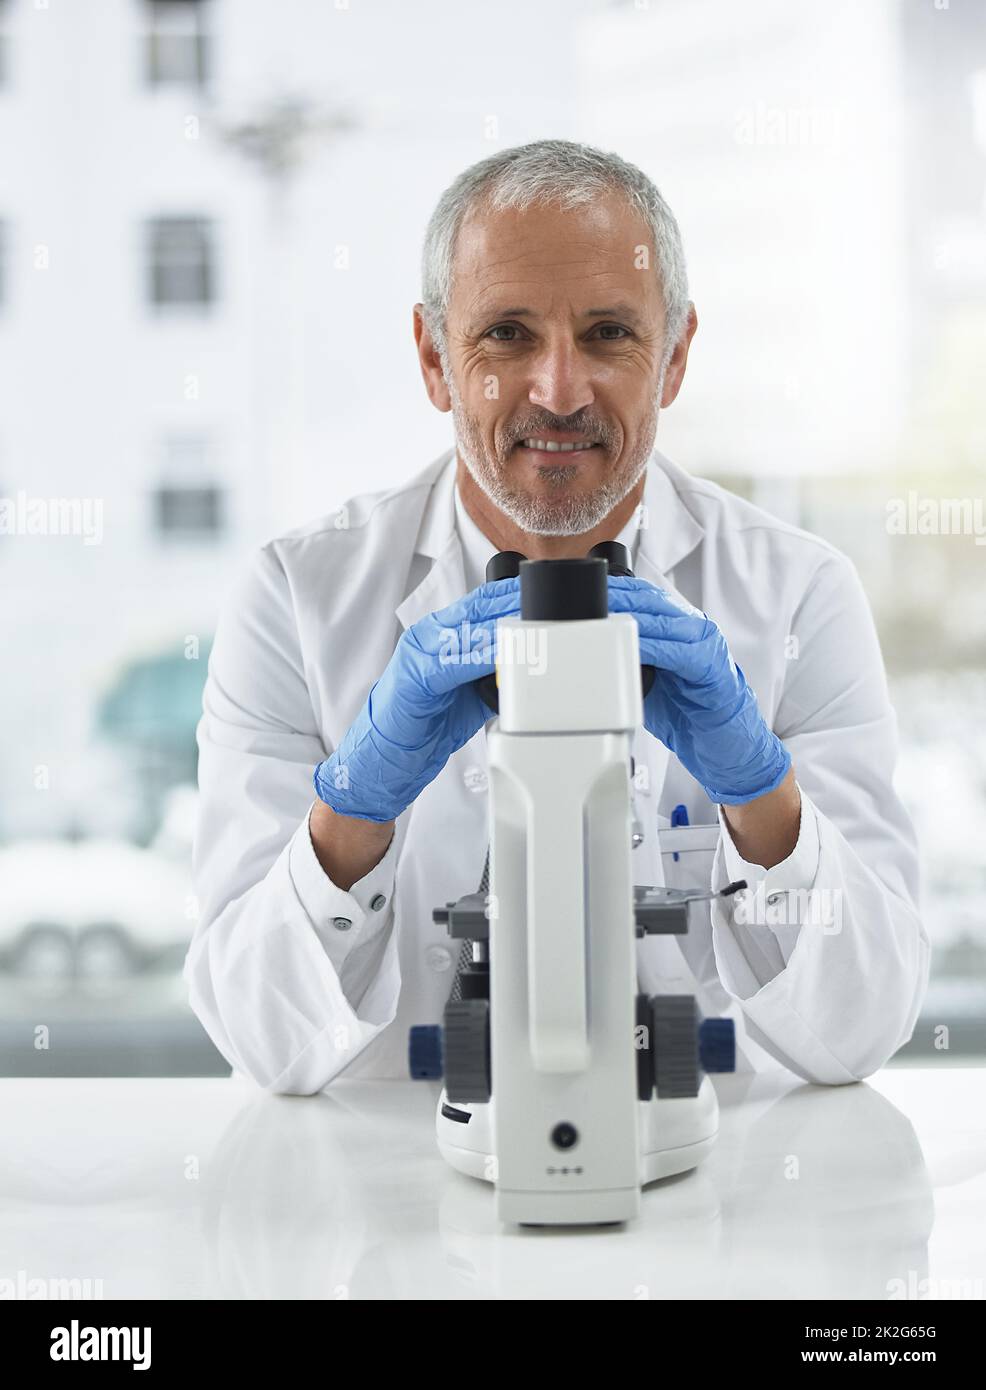 Discovery can be in the smallest details. Portrait of a researcher at work on a microscope in a lab. Stock Photo